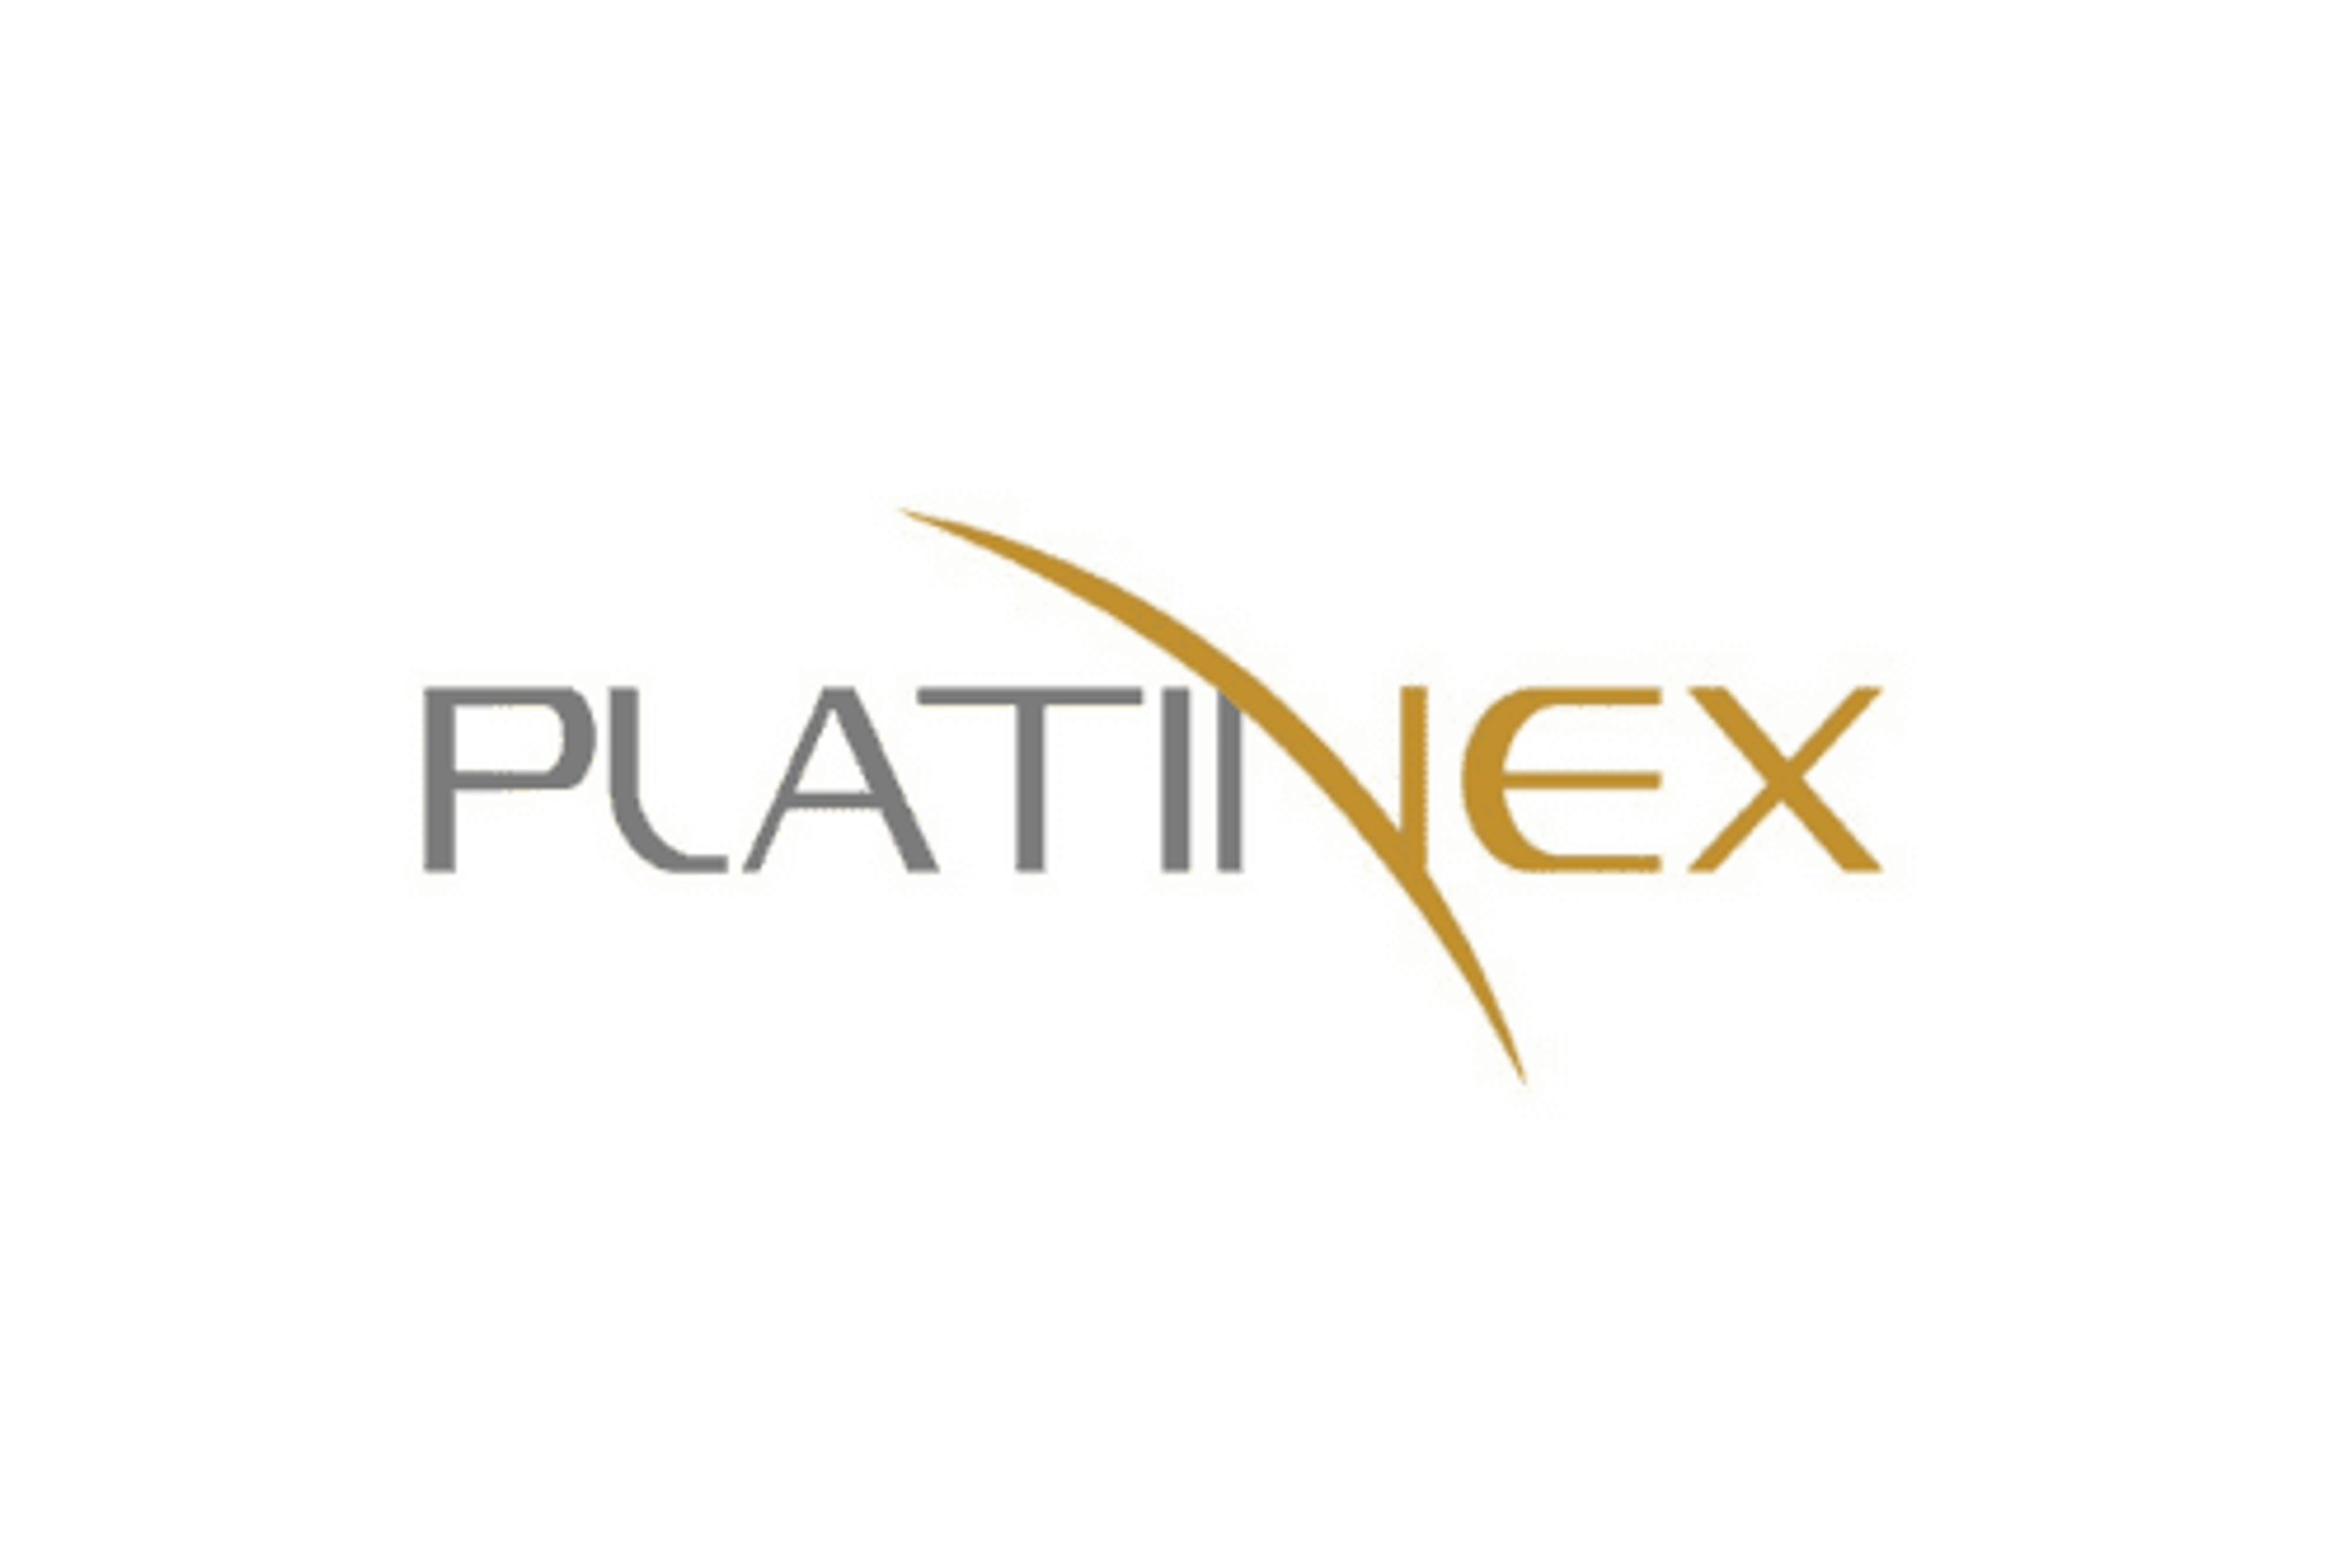 Platinex Announces Acquisition of Mining Claims at Shining Tree Gold Project